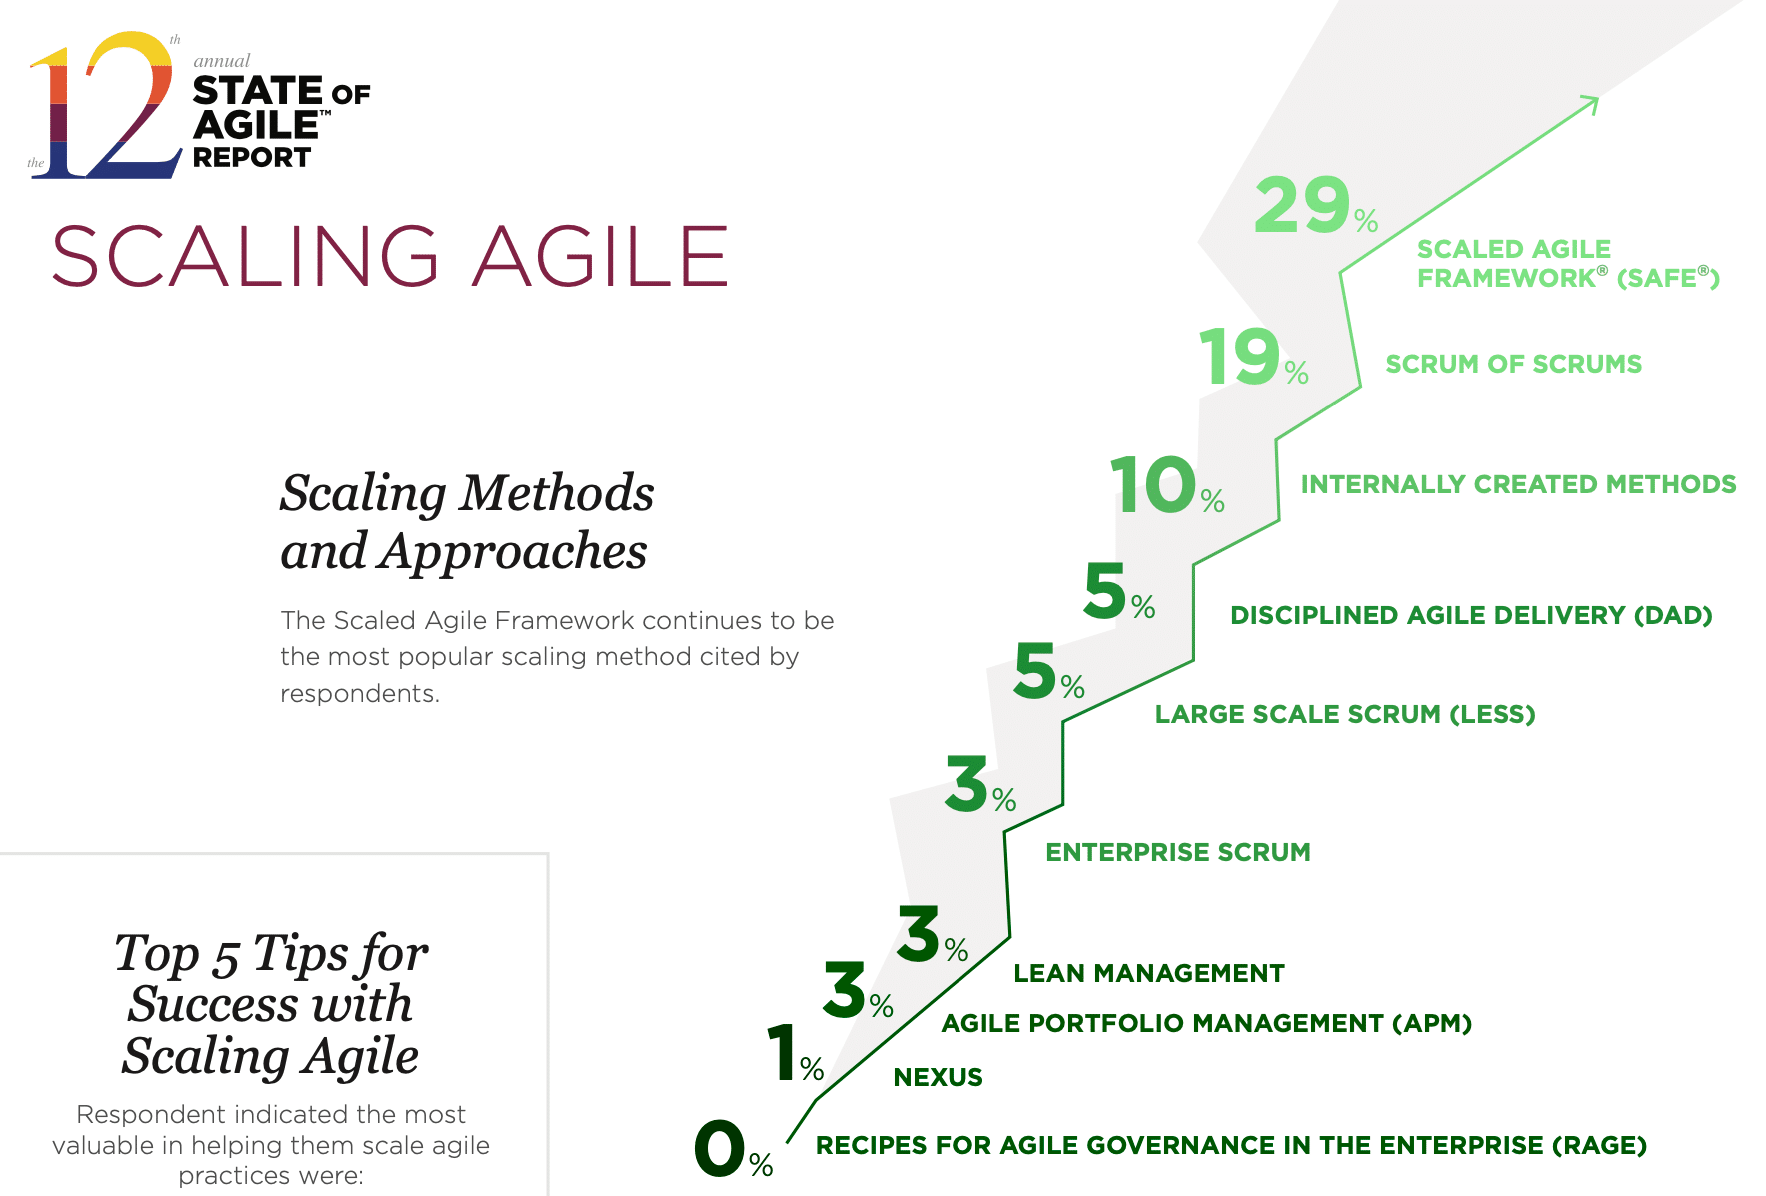 Agile Scaling Approaches from Collabnet VersionOne 2017 Annual State of Agile Report